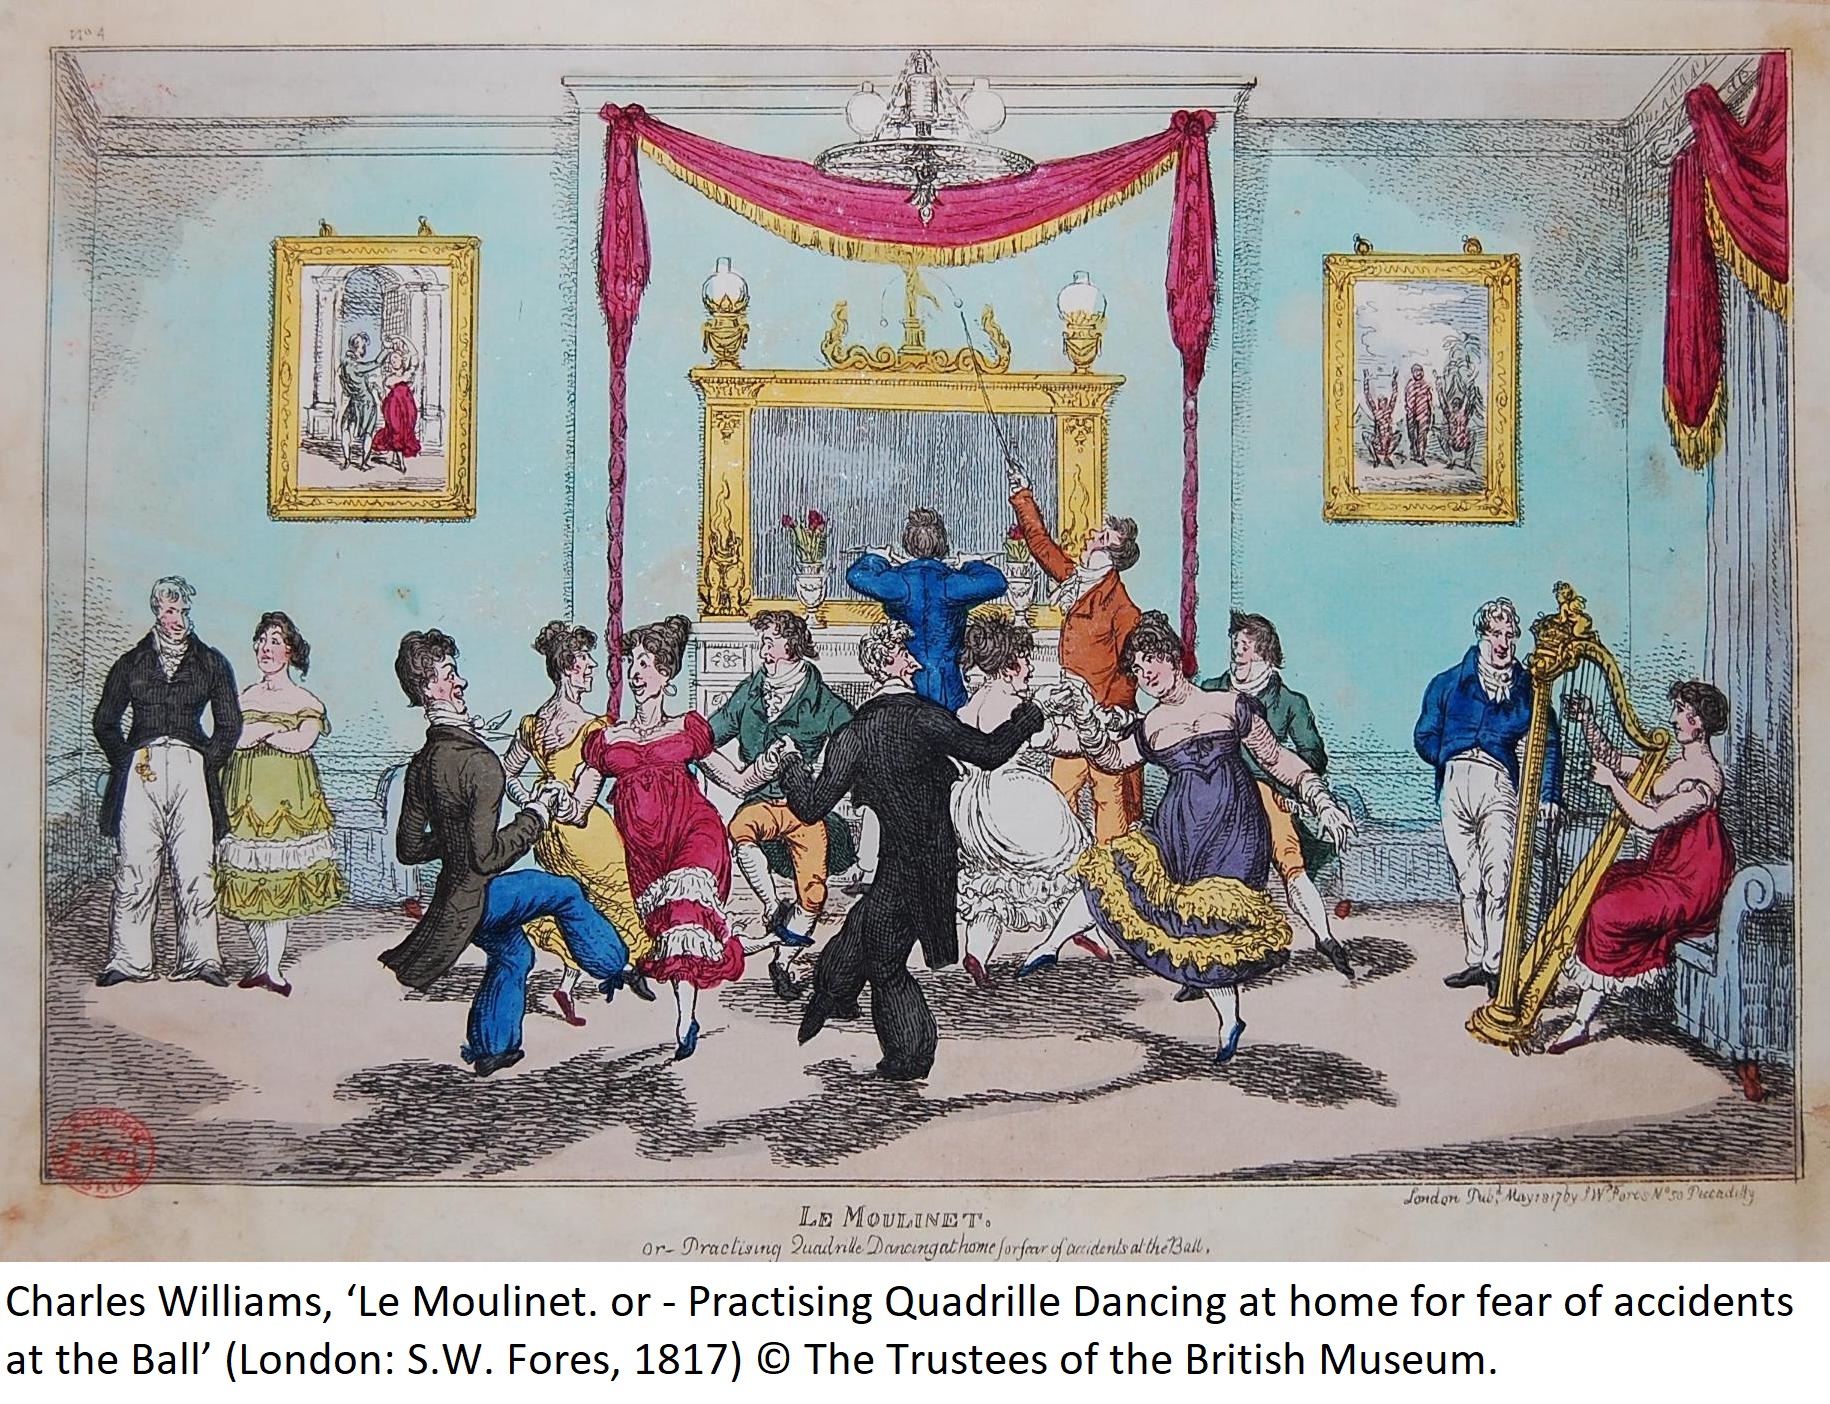 Charles Williams, ‘Le Moulinet. or - Practising Quadrille Dancing at home for fear of accidents at the Ball’ (London: S.W. Fores, 1817) © The Trustees of the British Museum.